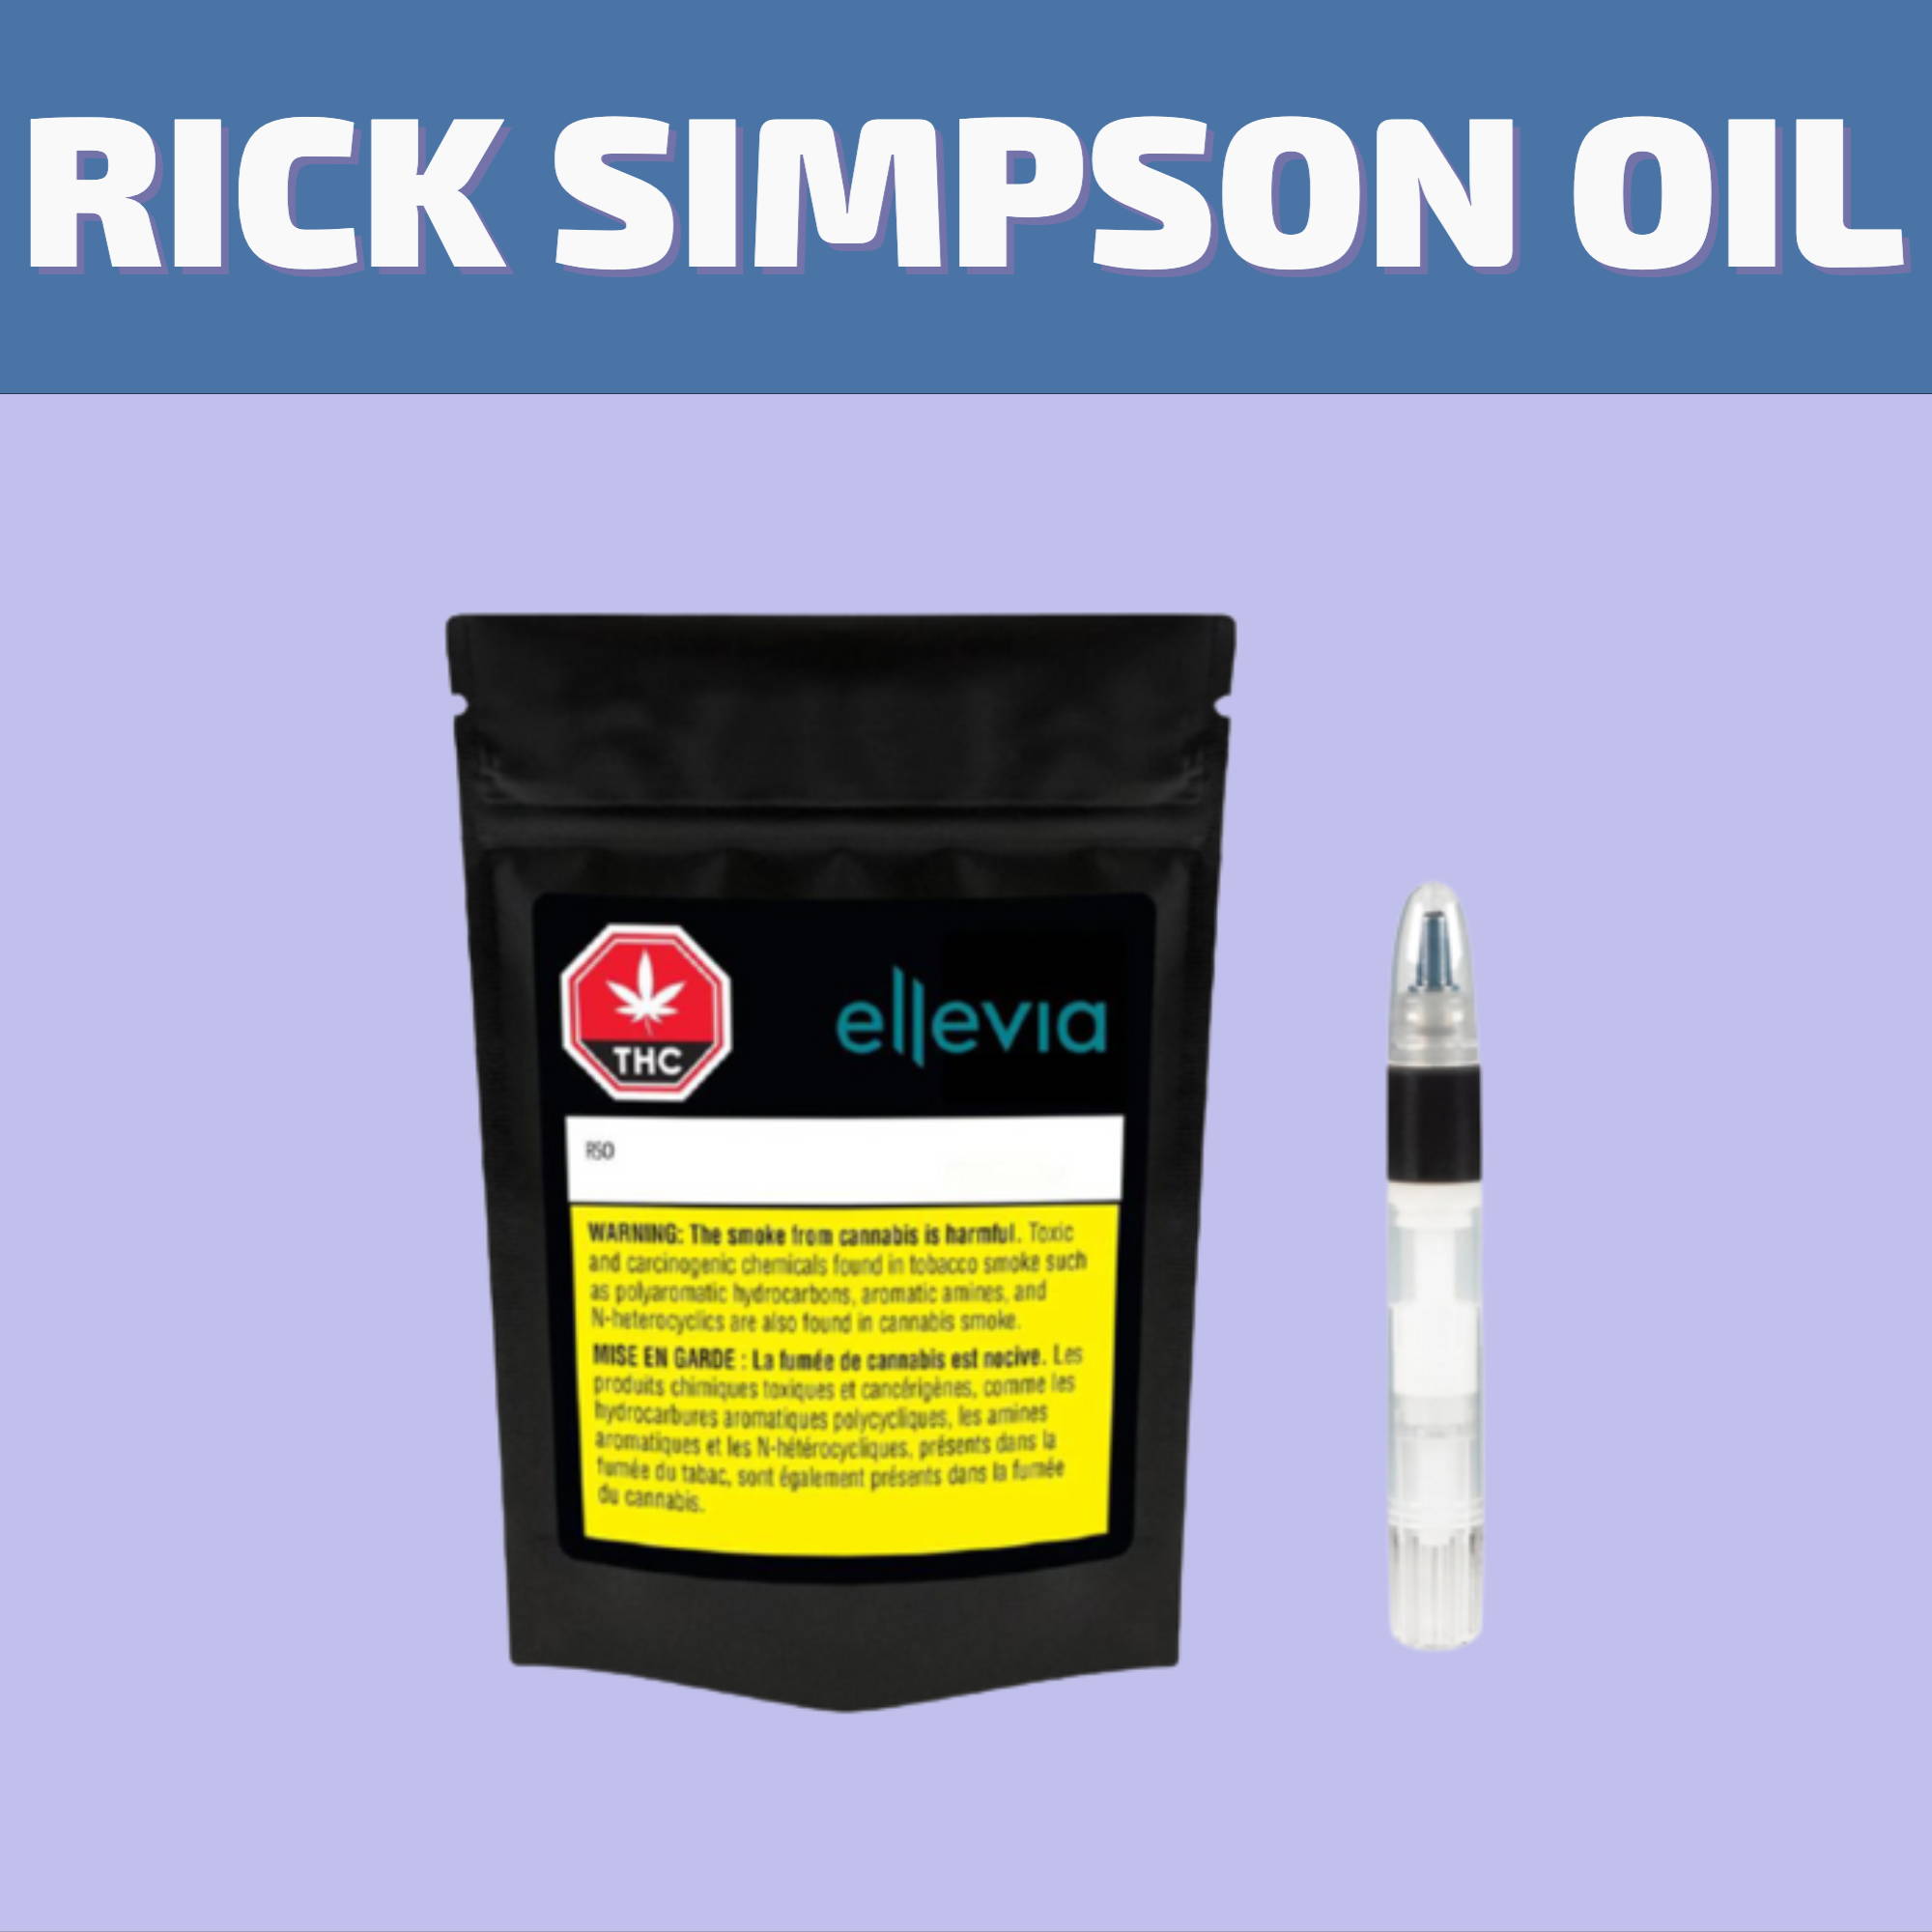 Shop our selection of Rick Simpson Oil, RSO, and Phoenix Tears online for same day delivery or visit our dispensary on 580 Academy Road in Winnipeg.   